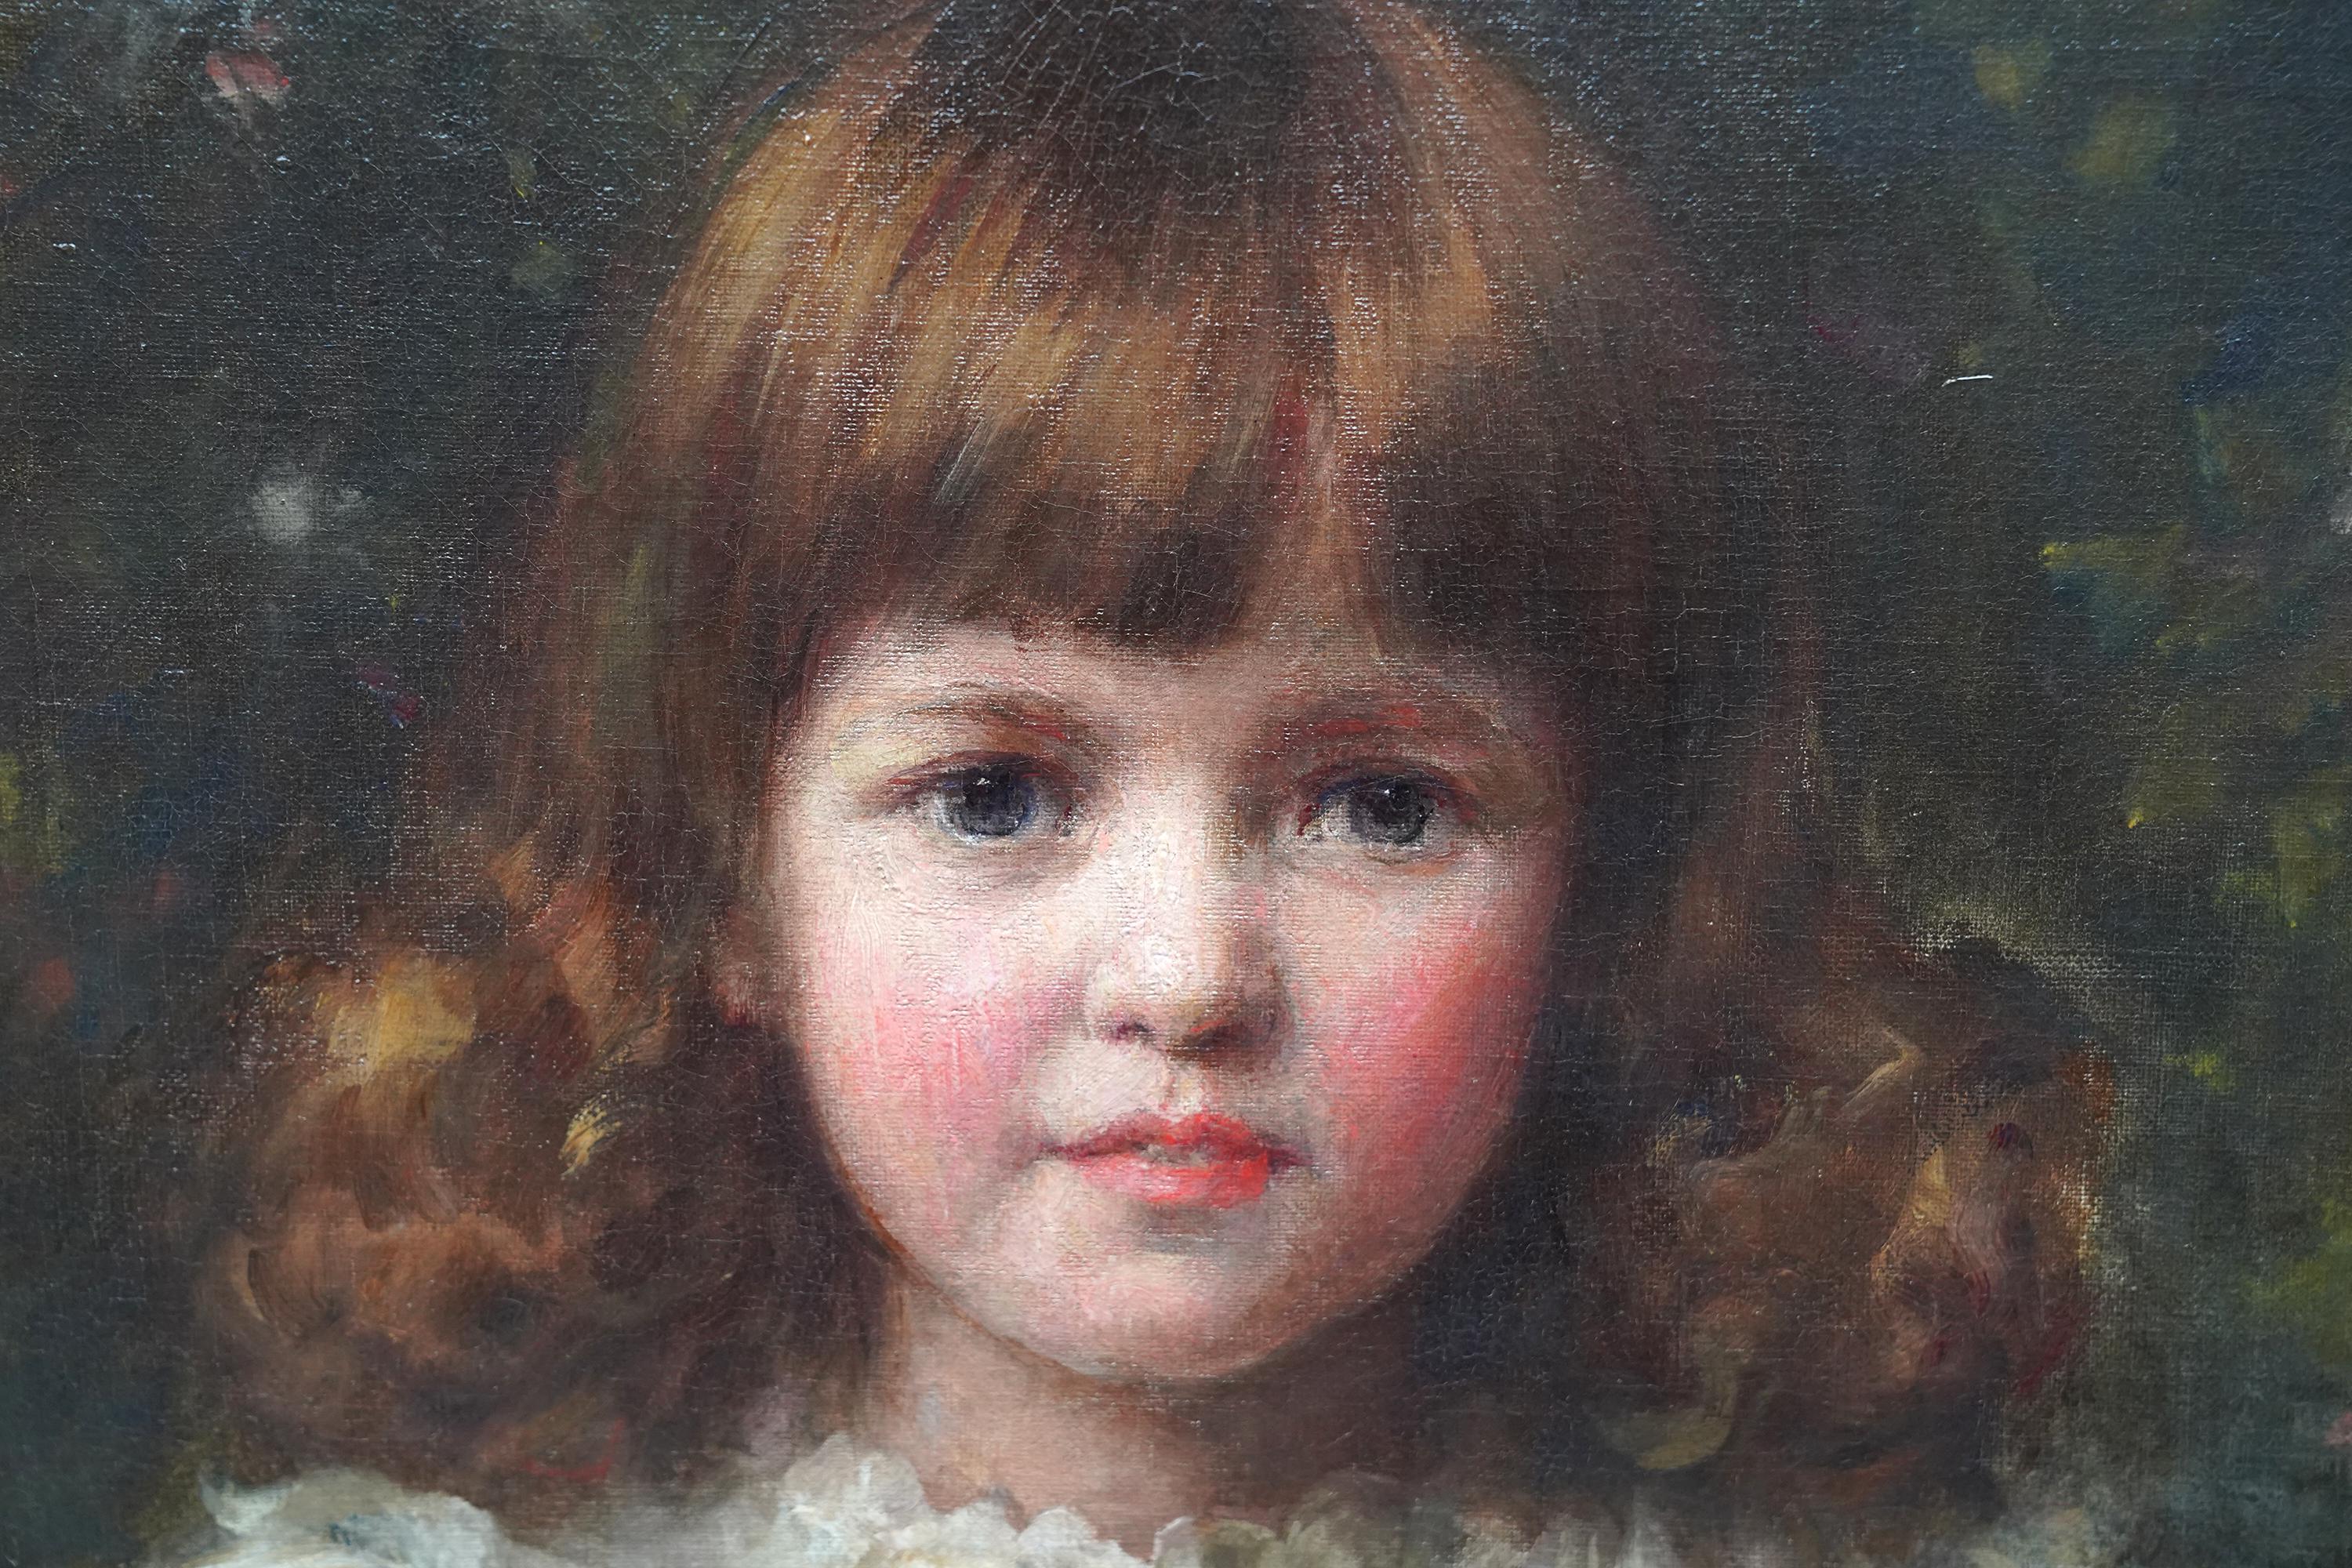 This lovely British Edwardian portrait oil painting is by noted Liverpool artist Robert Edward Morrison. Born on the Isle of Man, Morrison moved to Liverpool aged 21 and exhibited 191 times at the Liverpool Academy acting as its President from